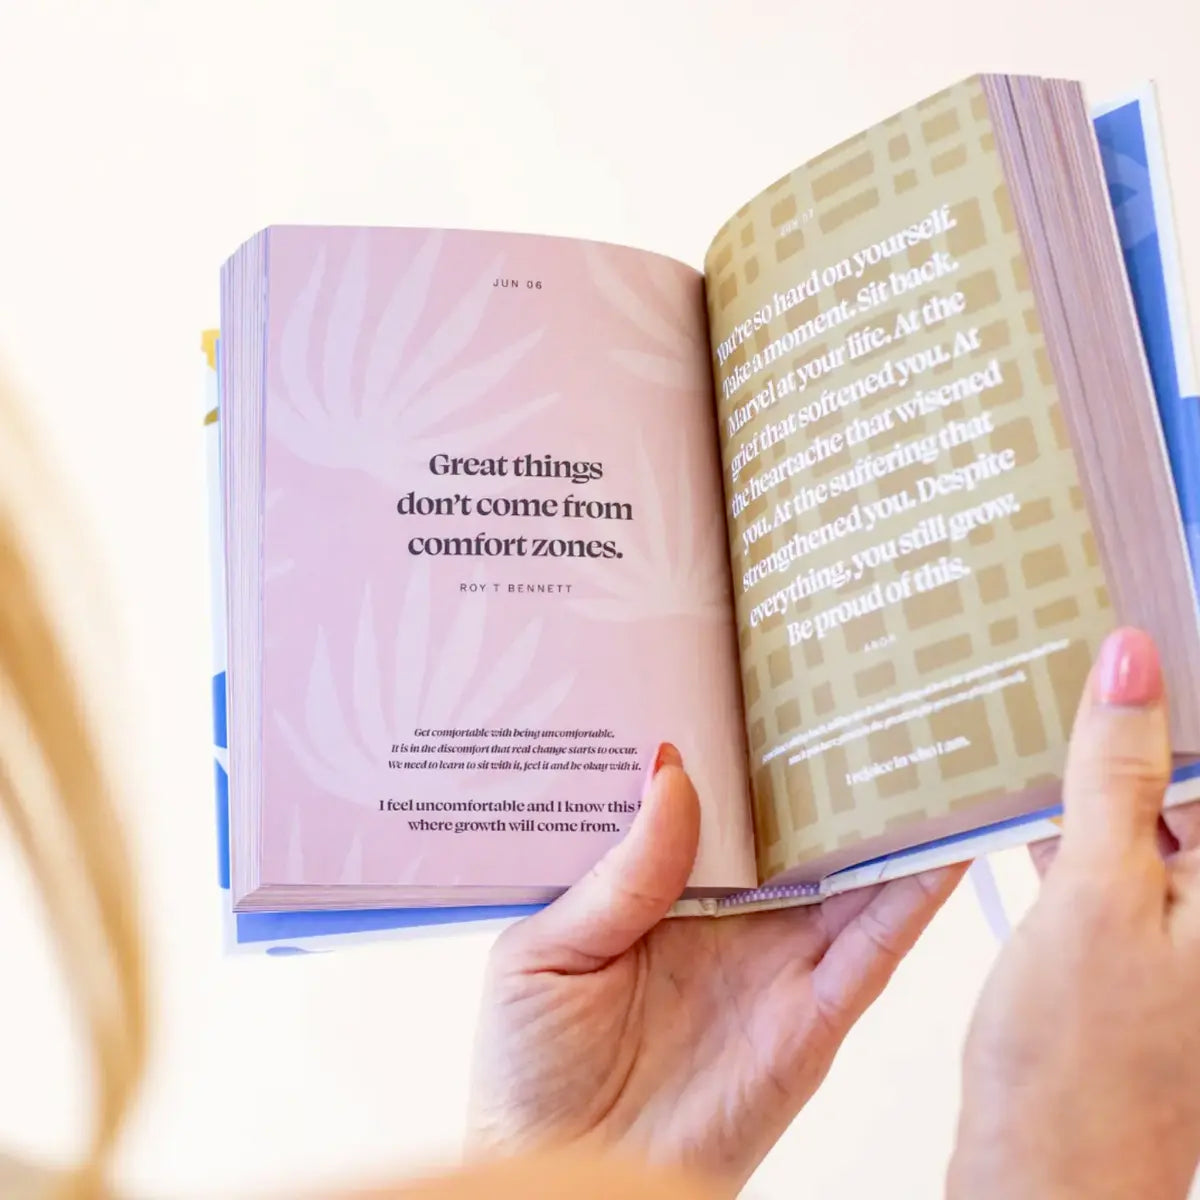 A woman holding an open book with "Daily Mantras to Ignite Your Purpose - V3" by Collective Hub for inspiration.